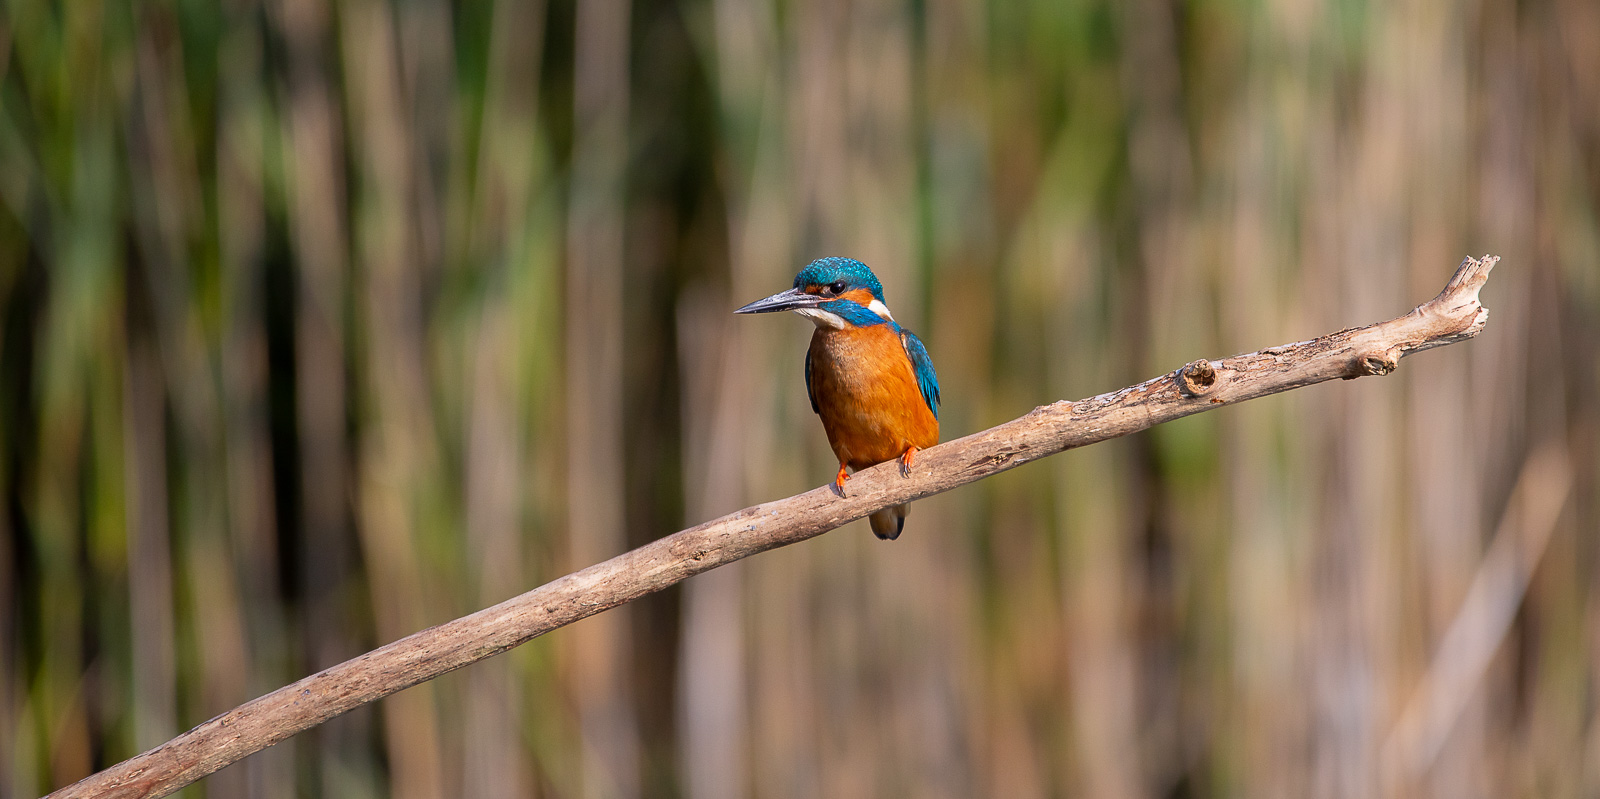 Kingfisher By Marcella